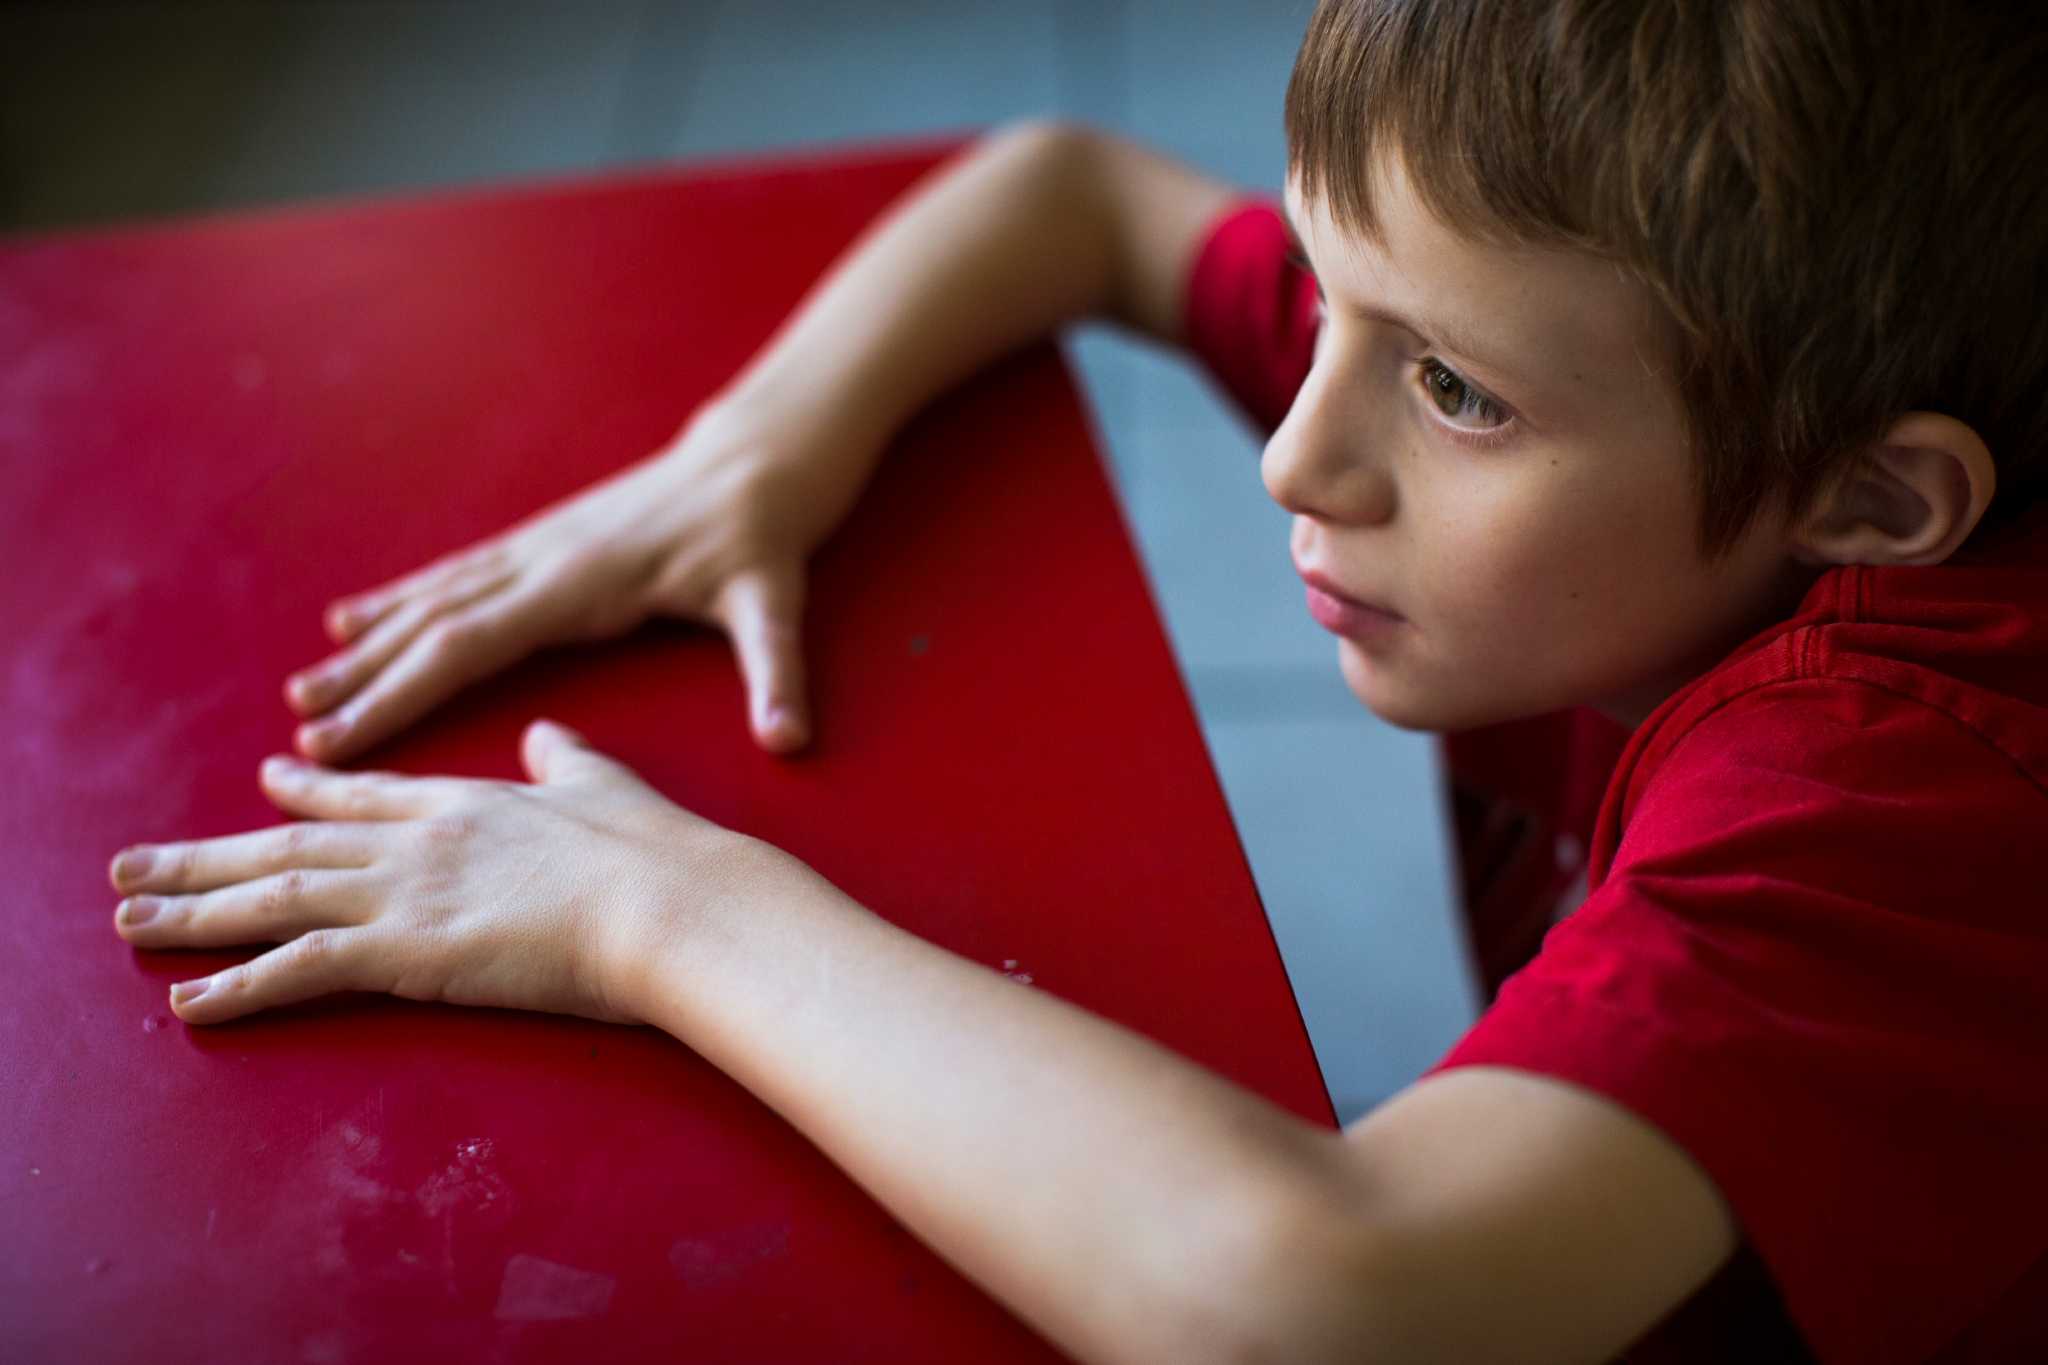 Should children with autistic spectrum disorders be exempted from homework